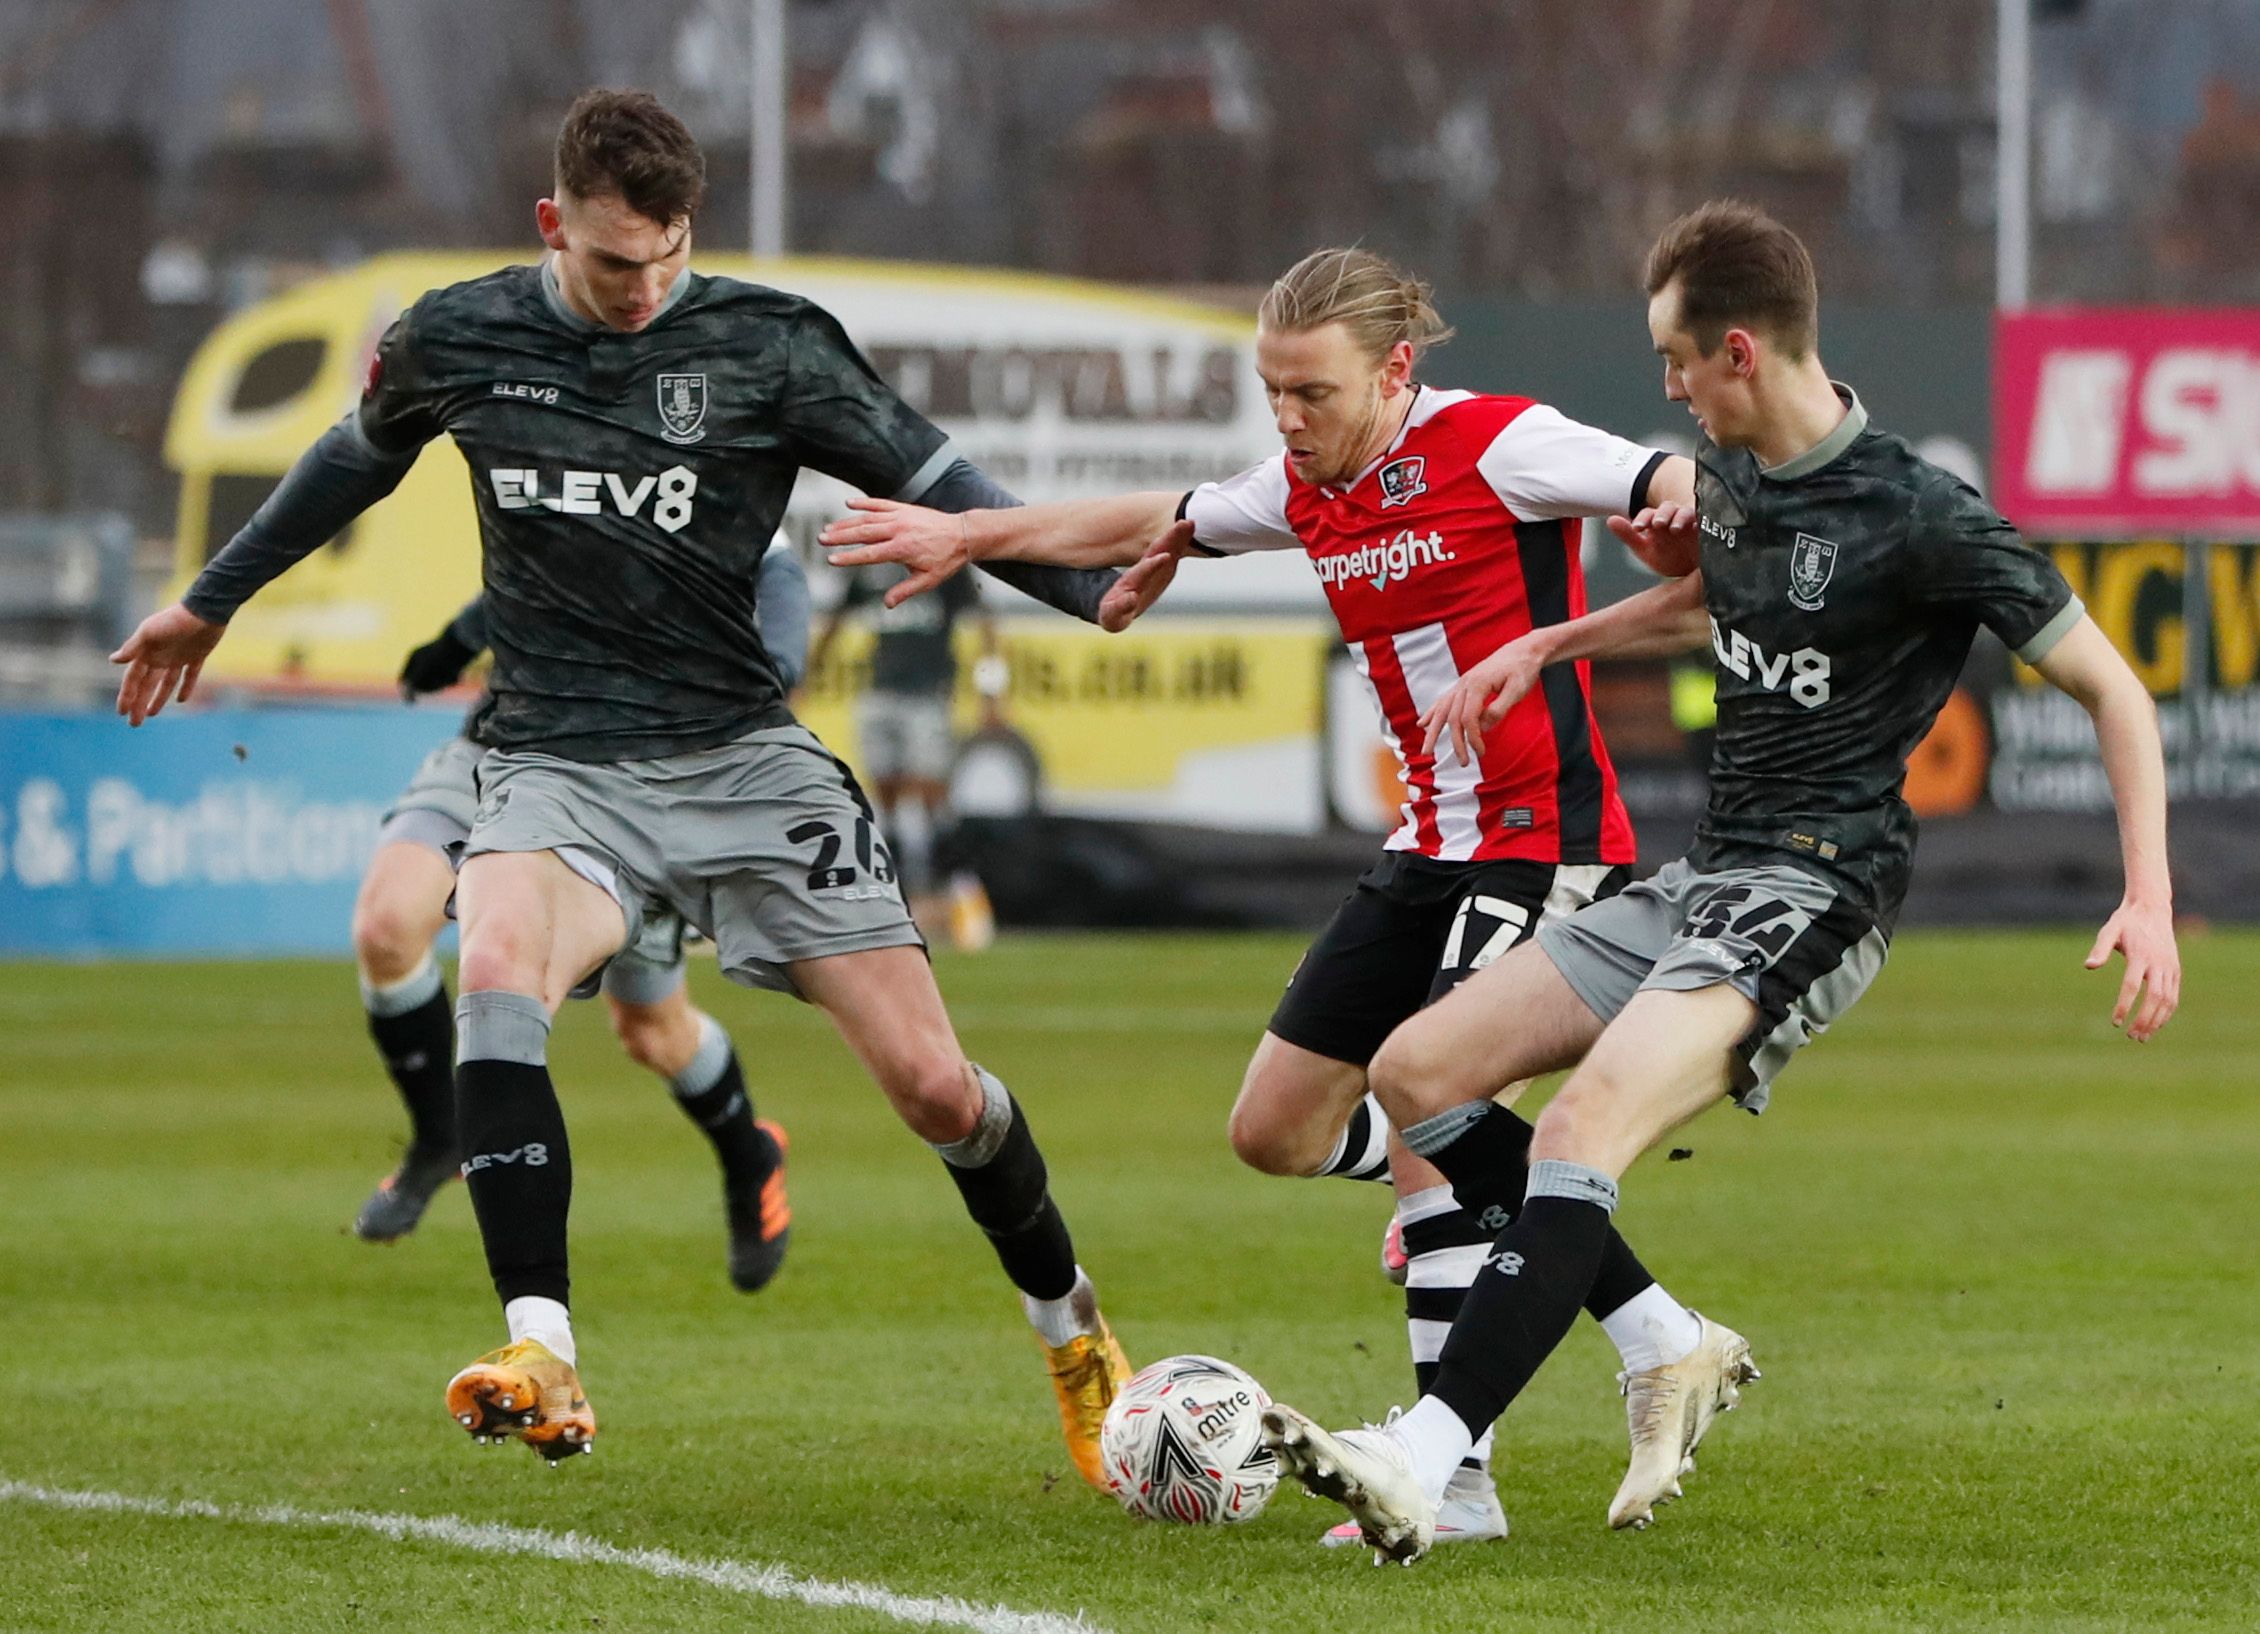 Soccer Football - FA Cup - Third Round - Exeter City v Sheffield Wednesday - St James Park, Exeter, Britain - January 9, 2021 Exeter City's Matt Jay in action with Sheffield Wednesday's Liam Shaw and Ciaran Brennan Action Images via Reuters/Paul Childs